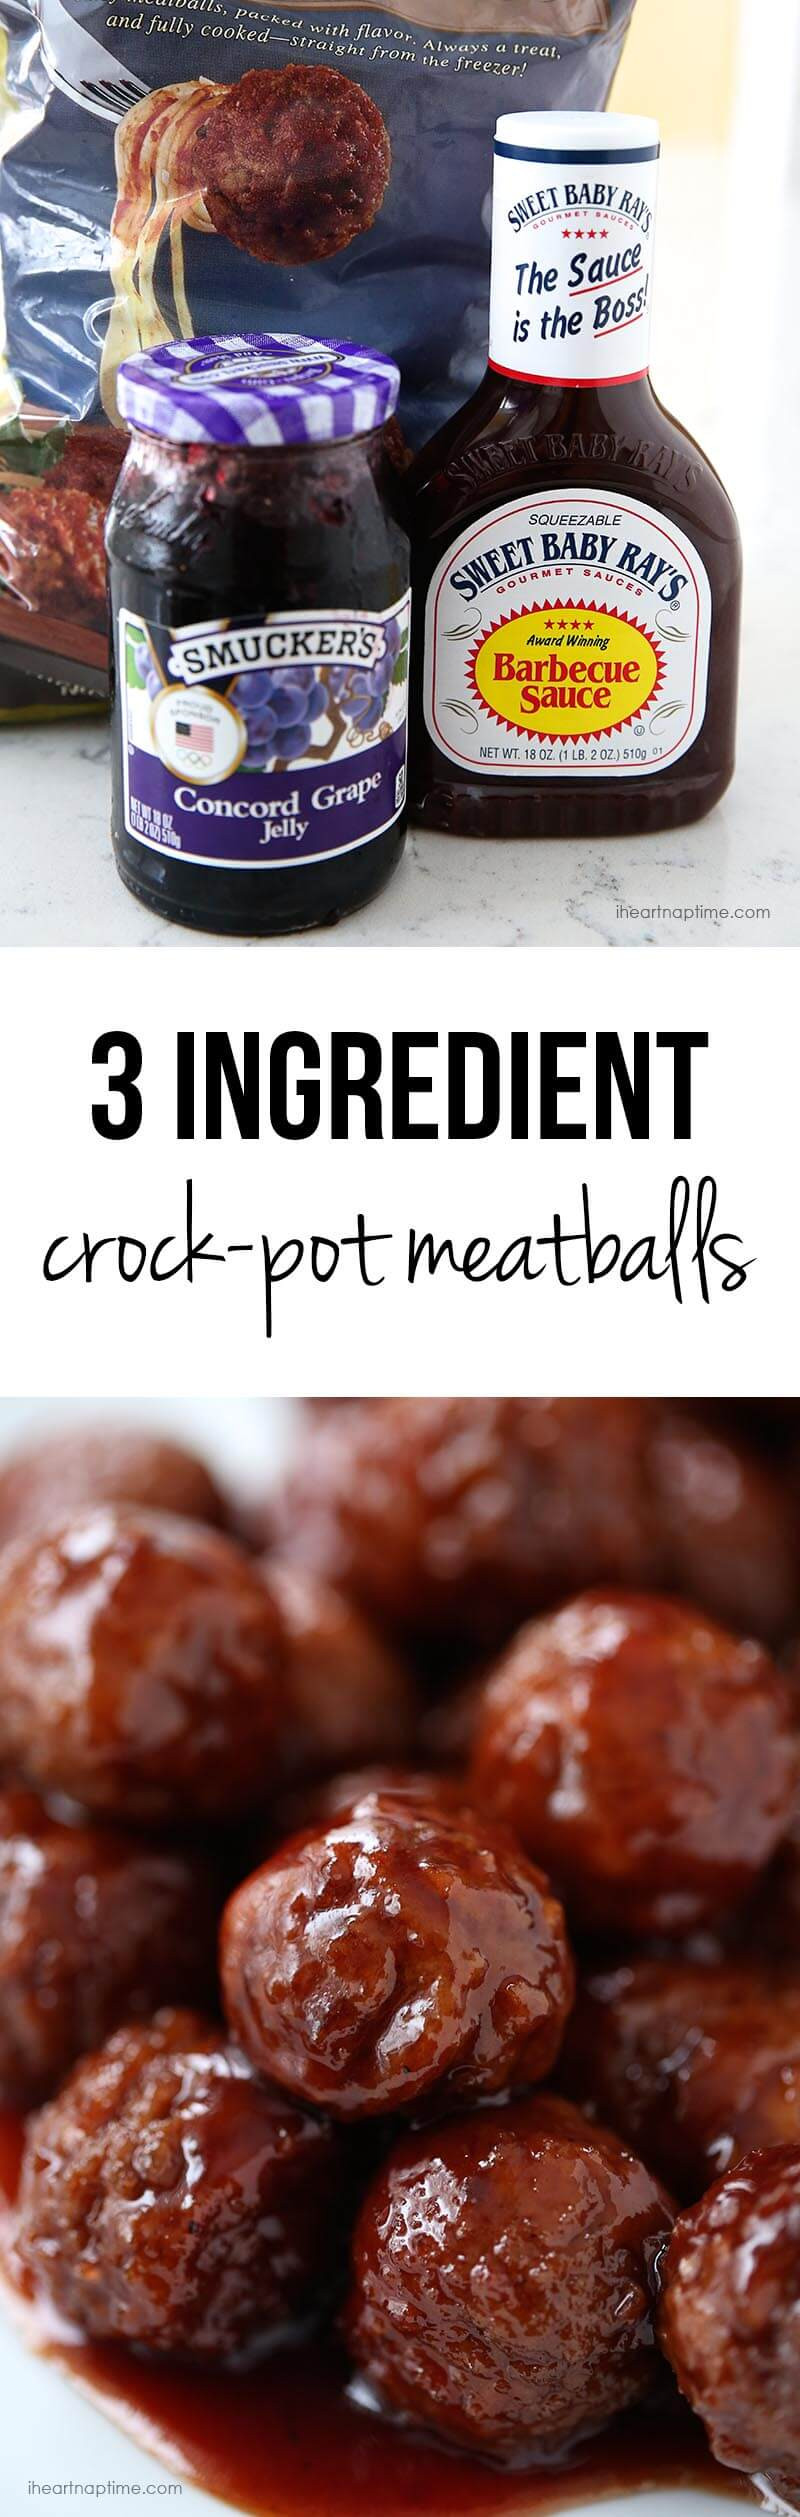 Meatballs With Jelly And Bbq Sauce
 Crock pot grape jelly & BBQ meatballs only 3 ingre nts